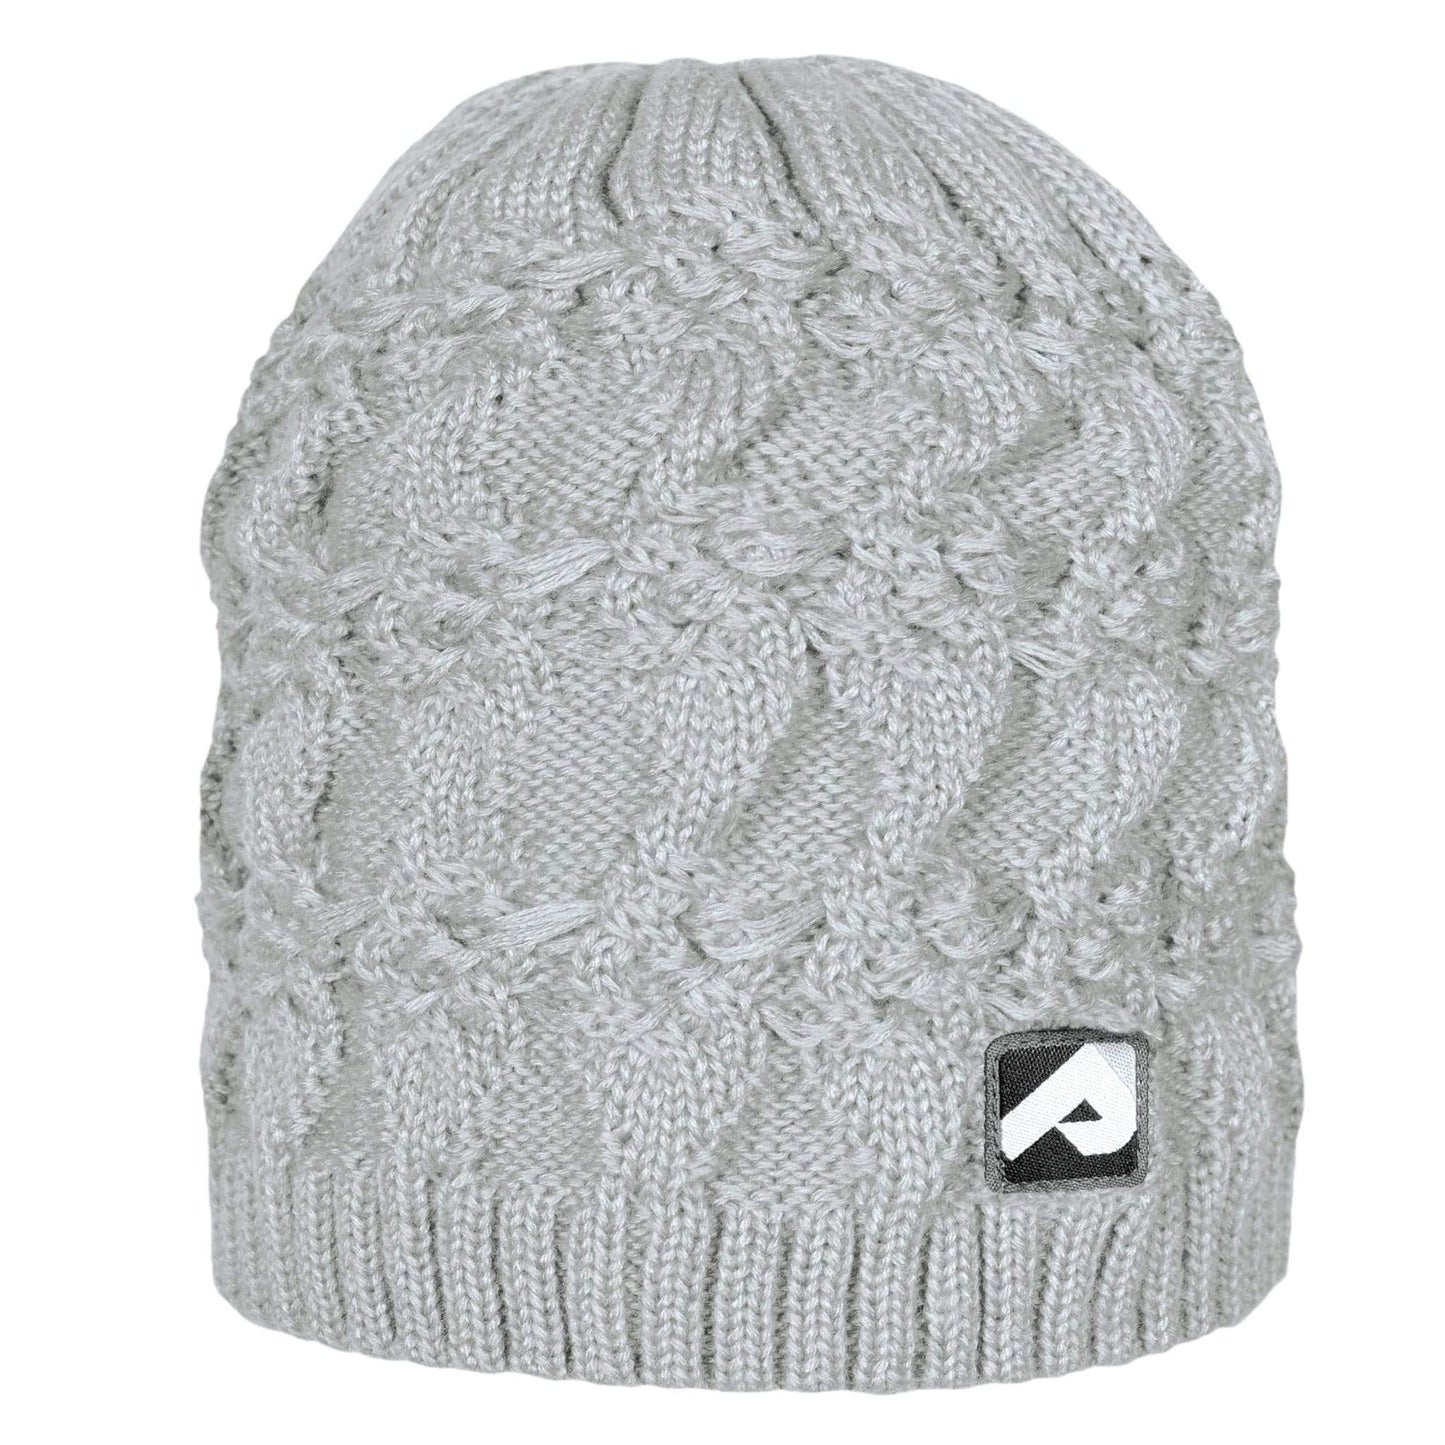 Knitted acrylic hat - light grey